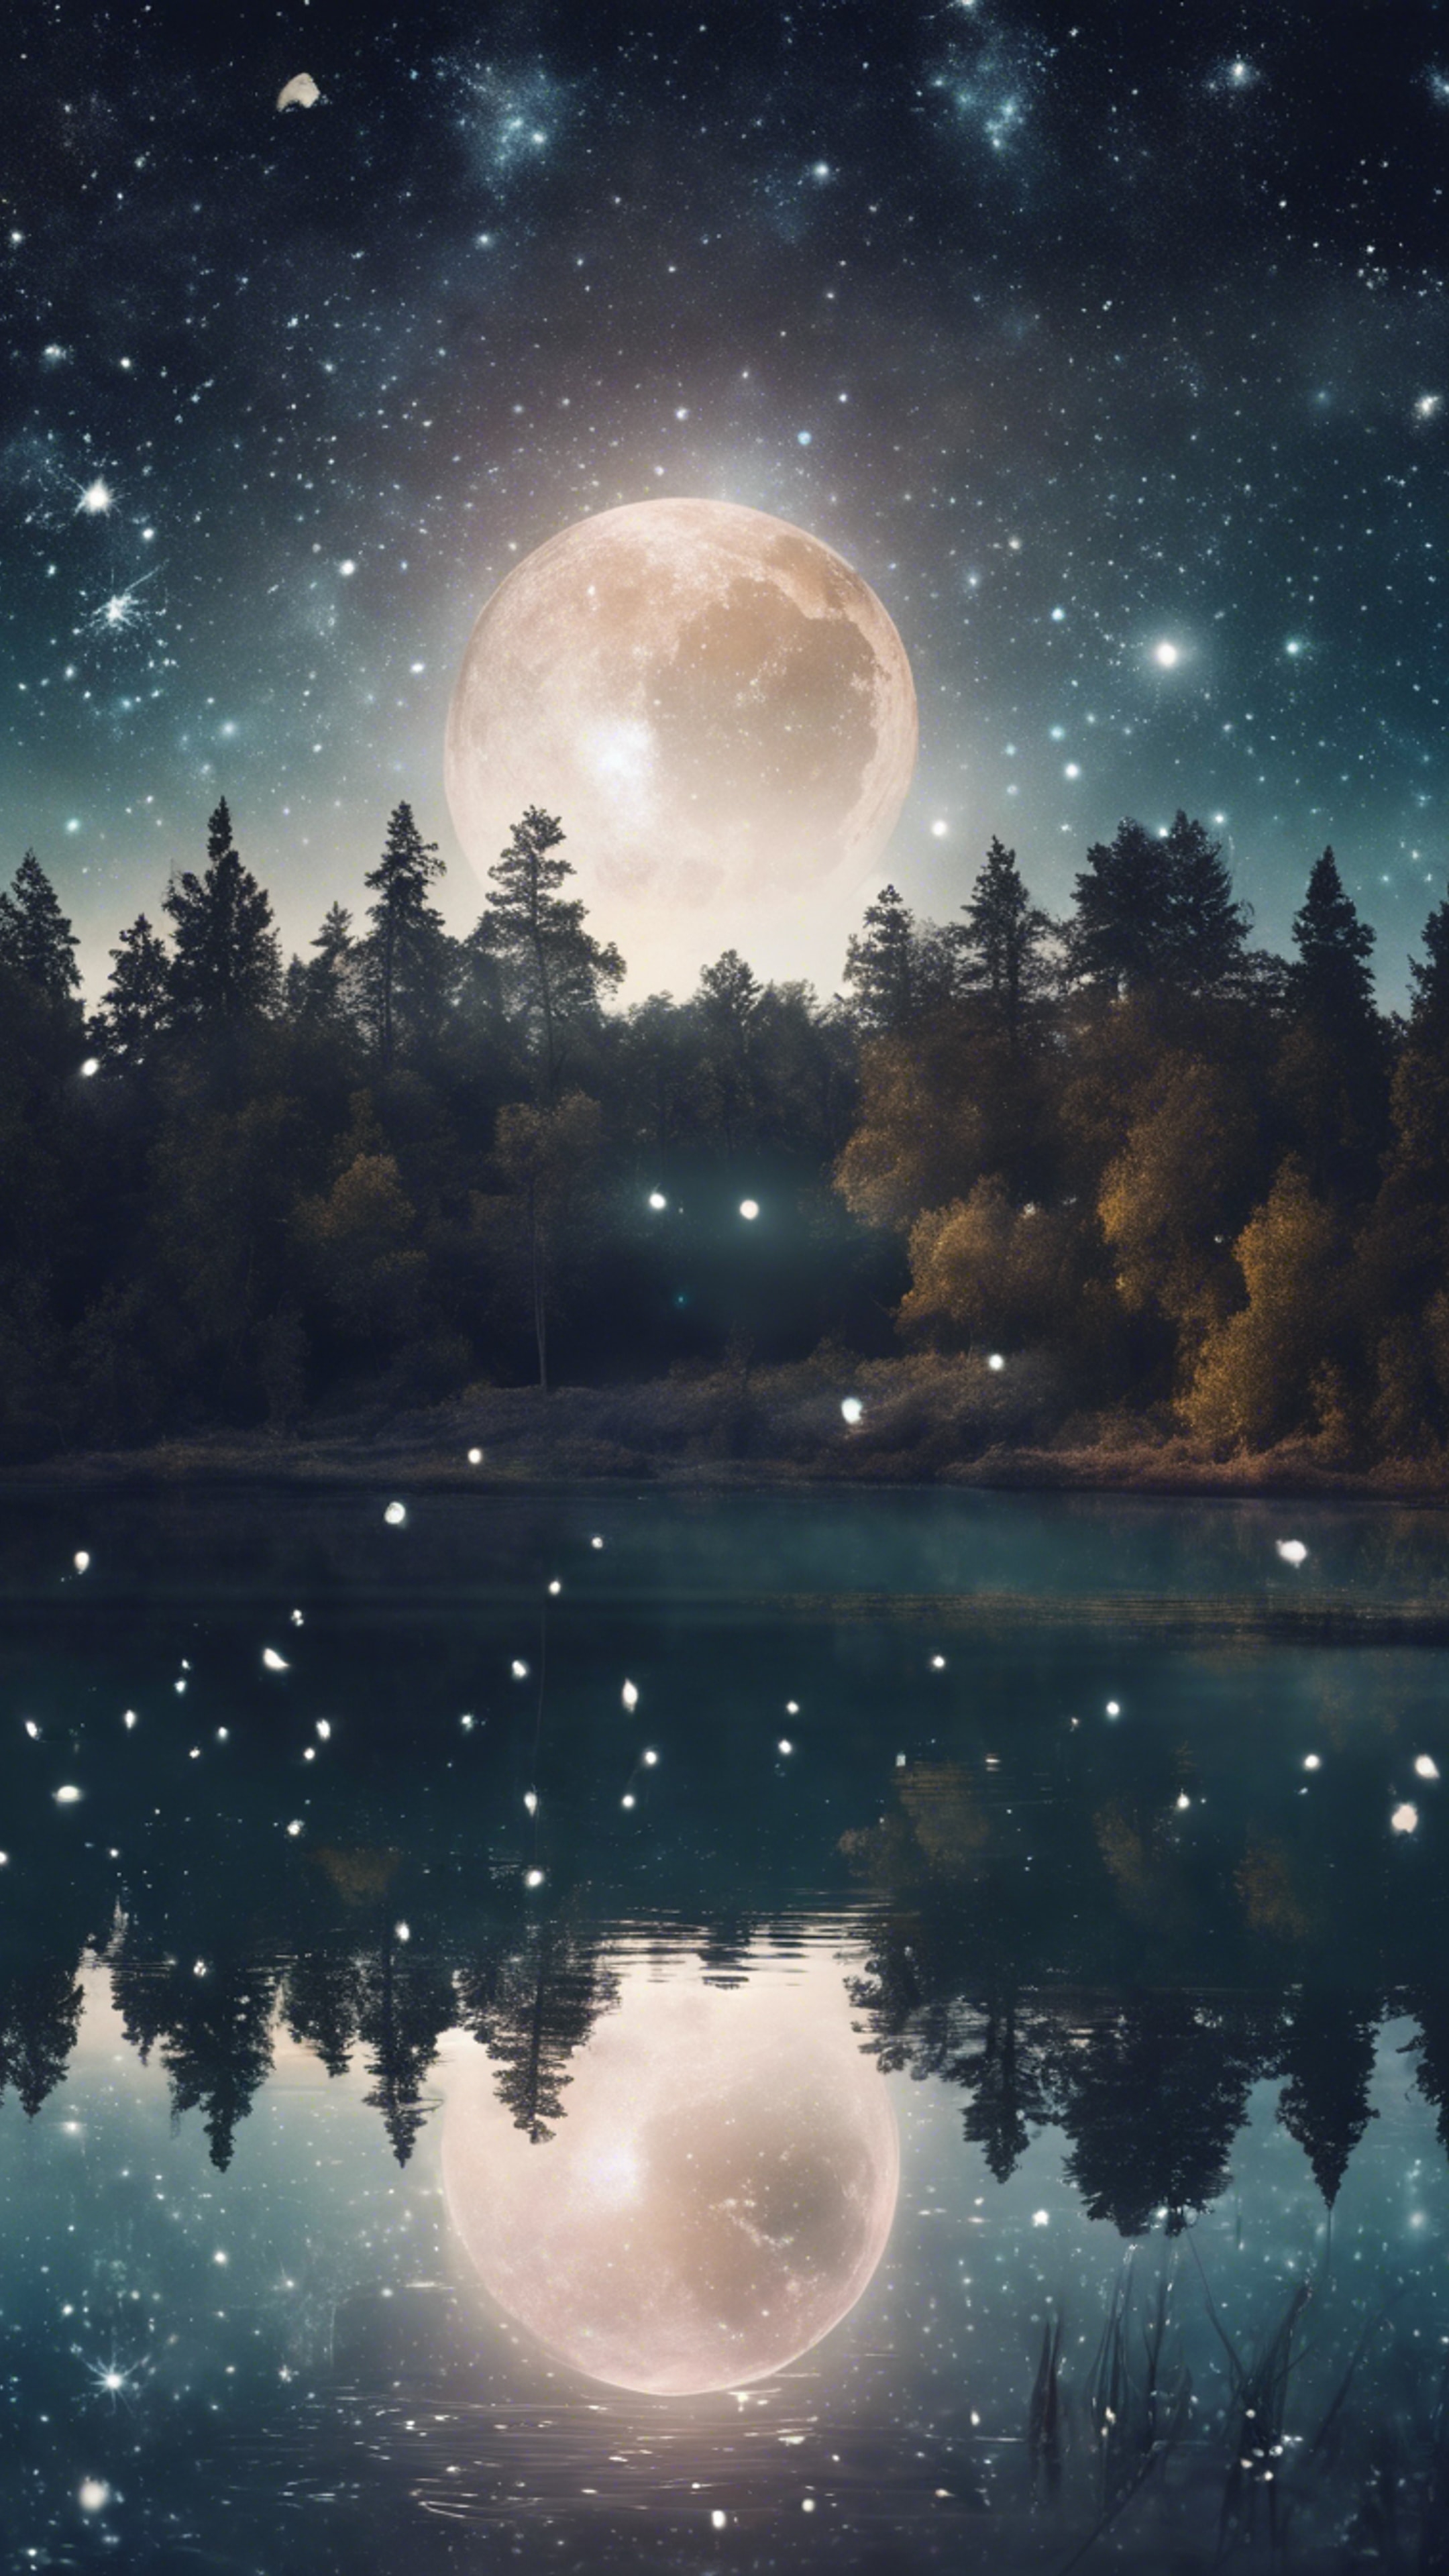 A mystical night sky over a tranquil lake, filled with sparkling constellations and a magical, translucent moon. Wallpaper[02f115e6e6dc4626b628]